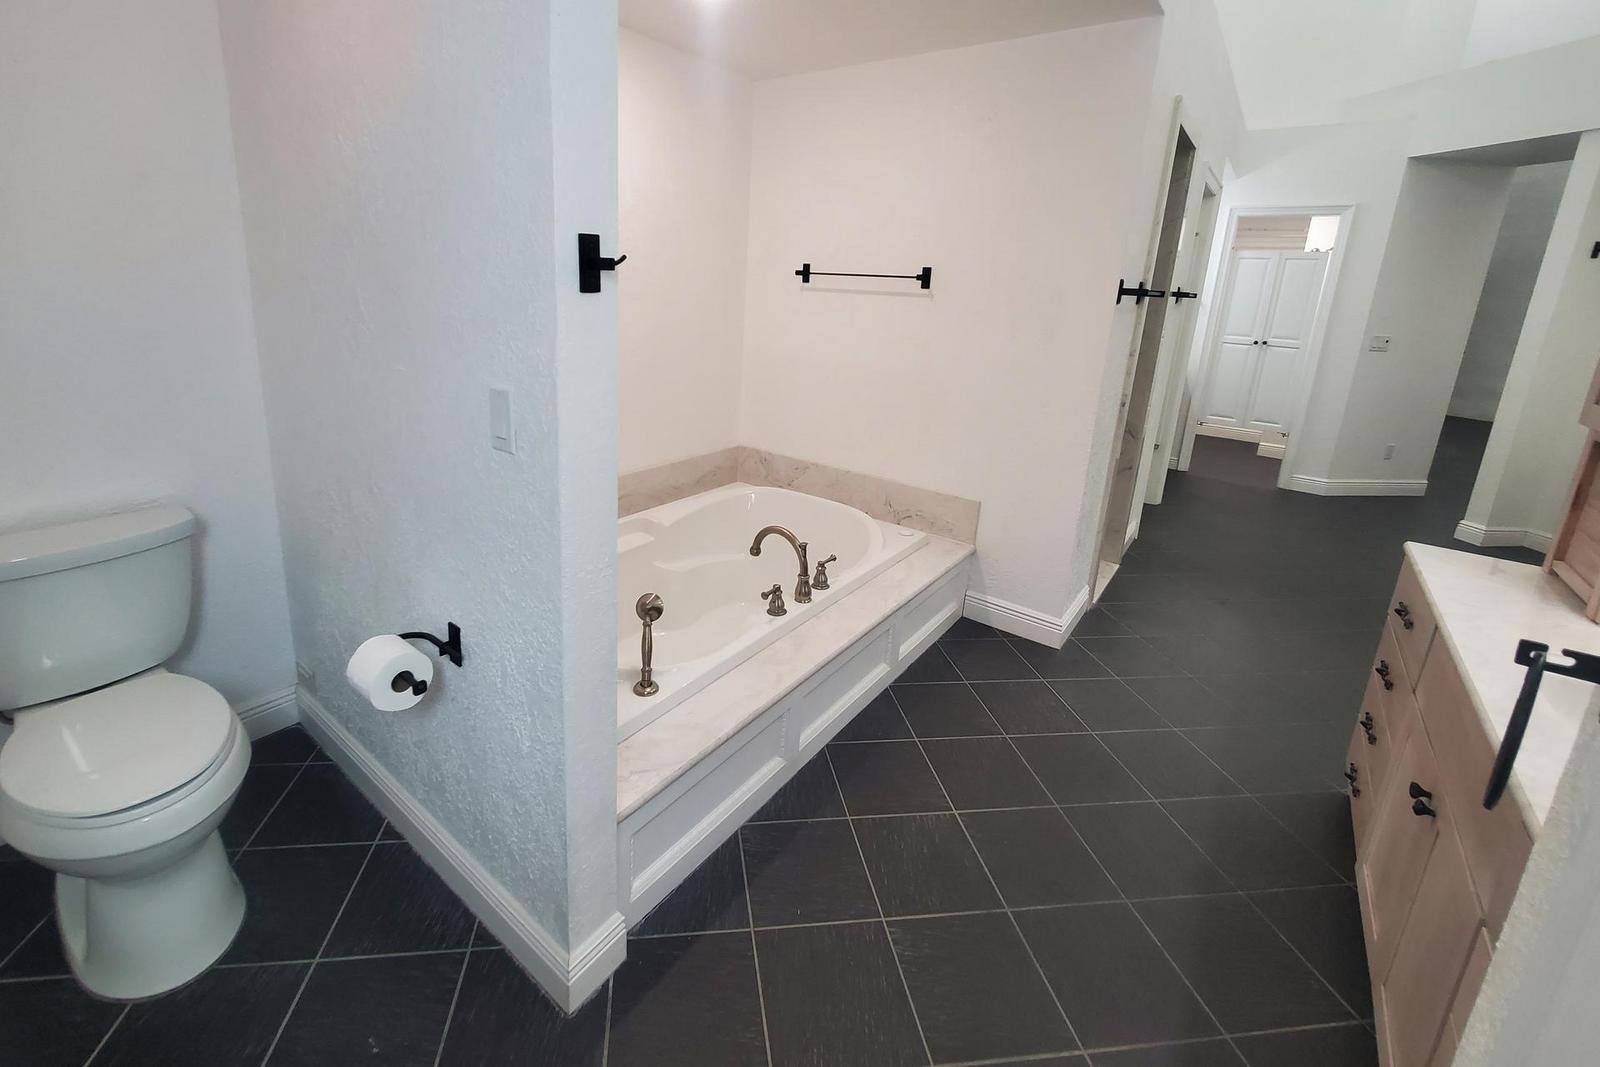 Two-Person Jetted Bathtub in Primary Bathroom.